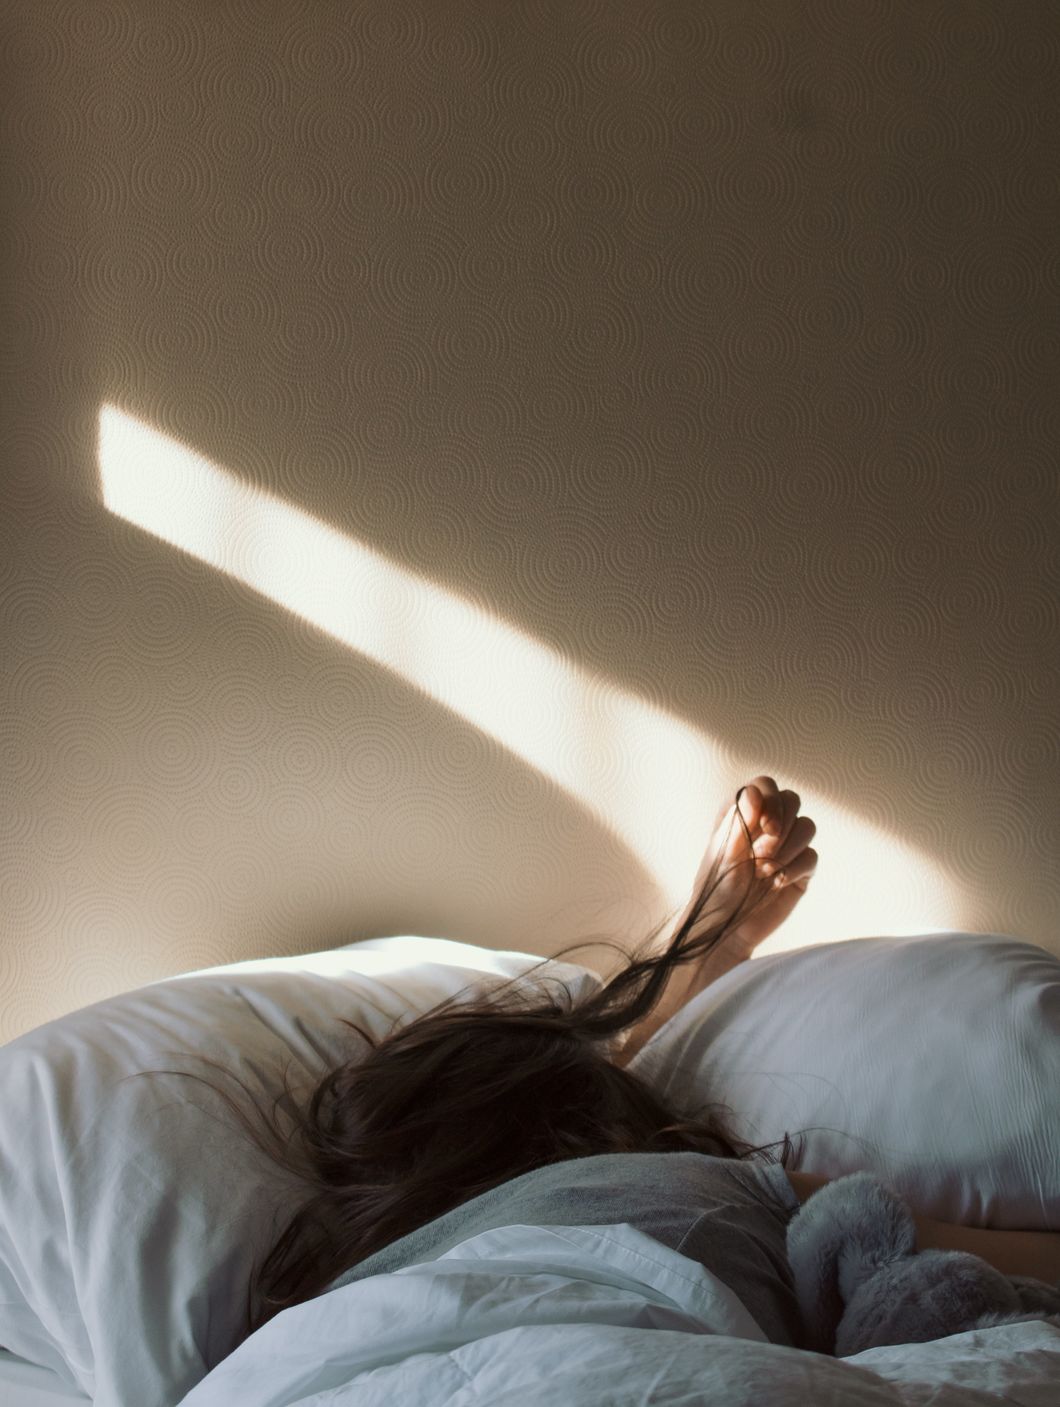 10 Reasons Getting Enough Sleep Is Extremely Important